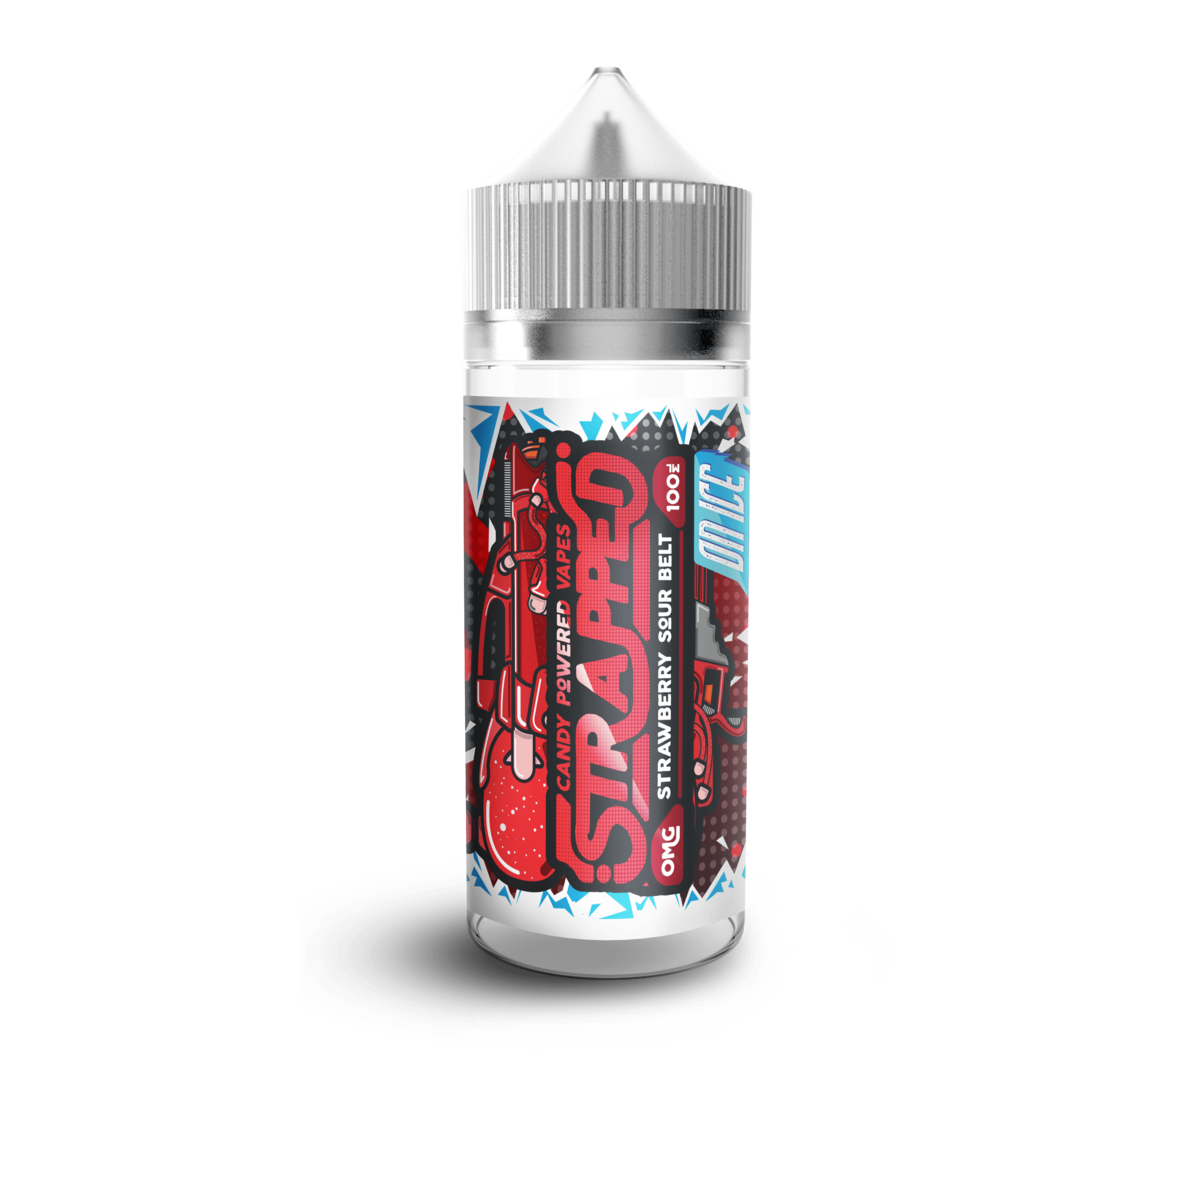 Strapped Strawberry Sour Belts on Ice 0mg Shortfill E-Liquid